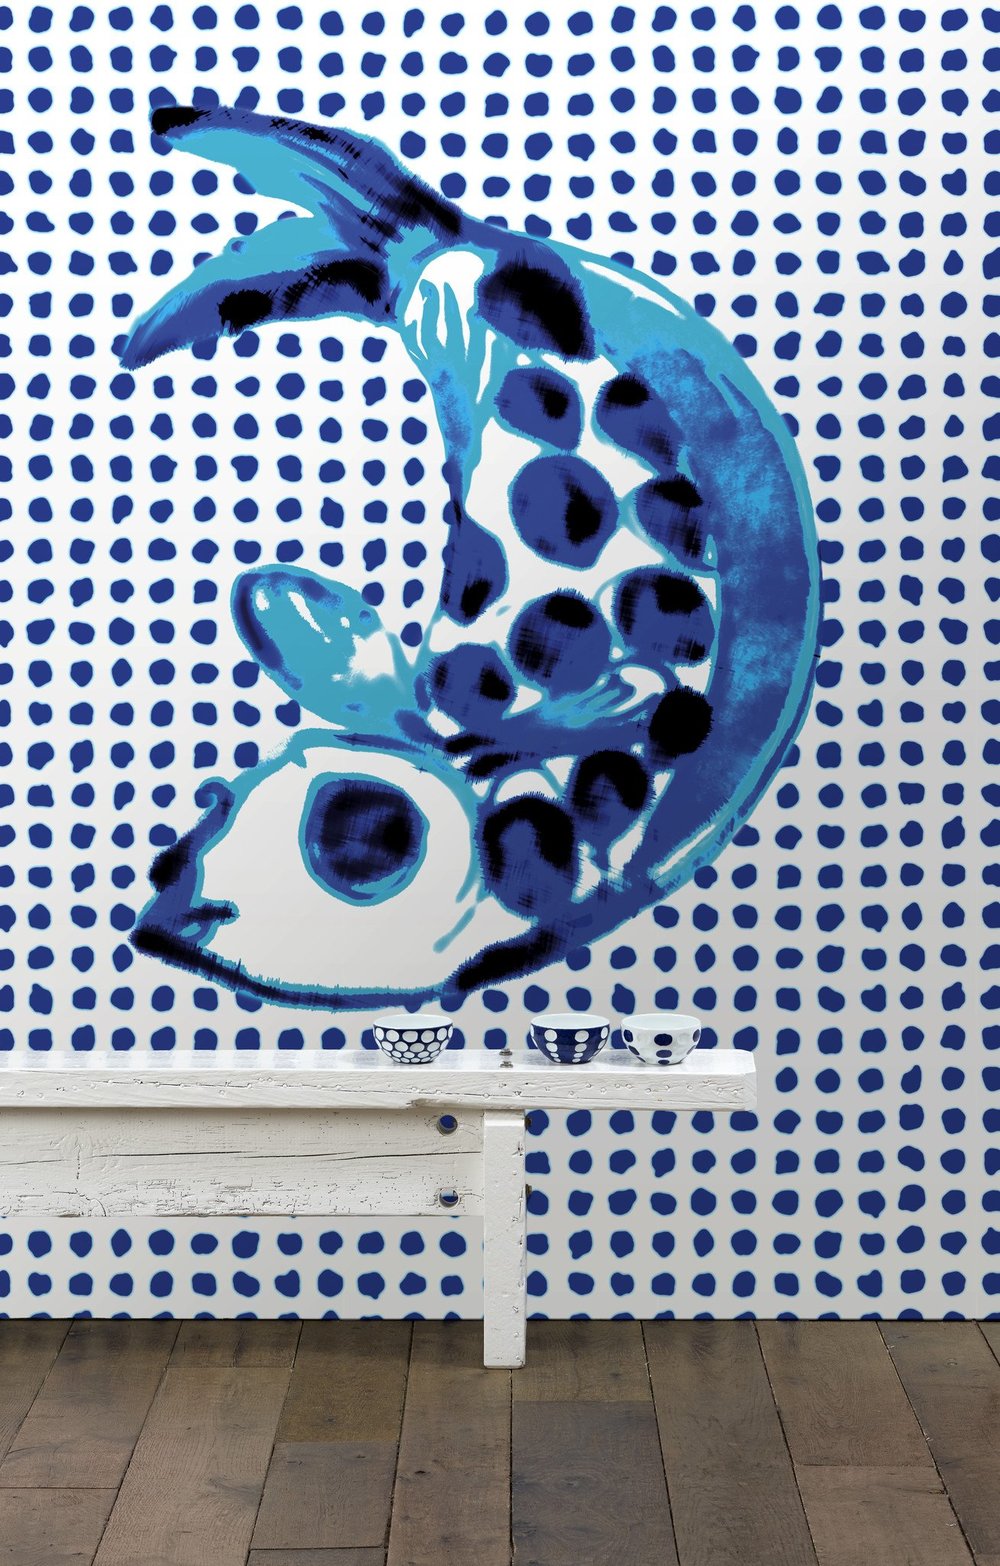 Paola Navone - wild and fun!